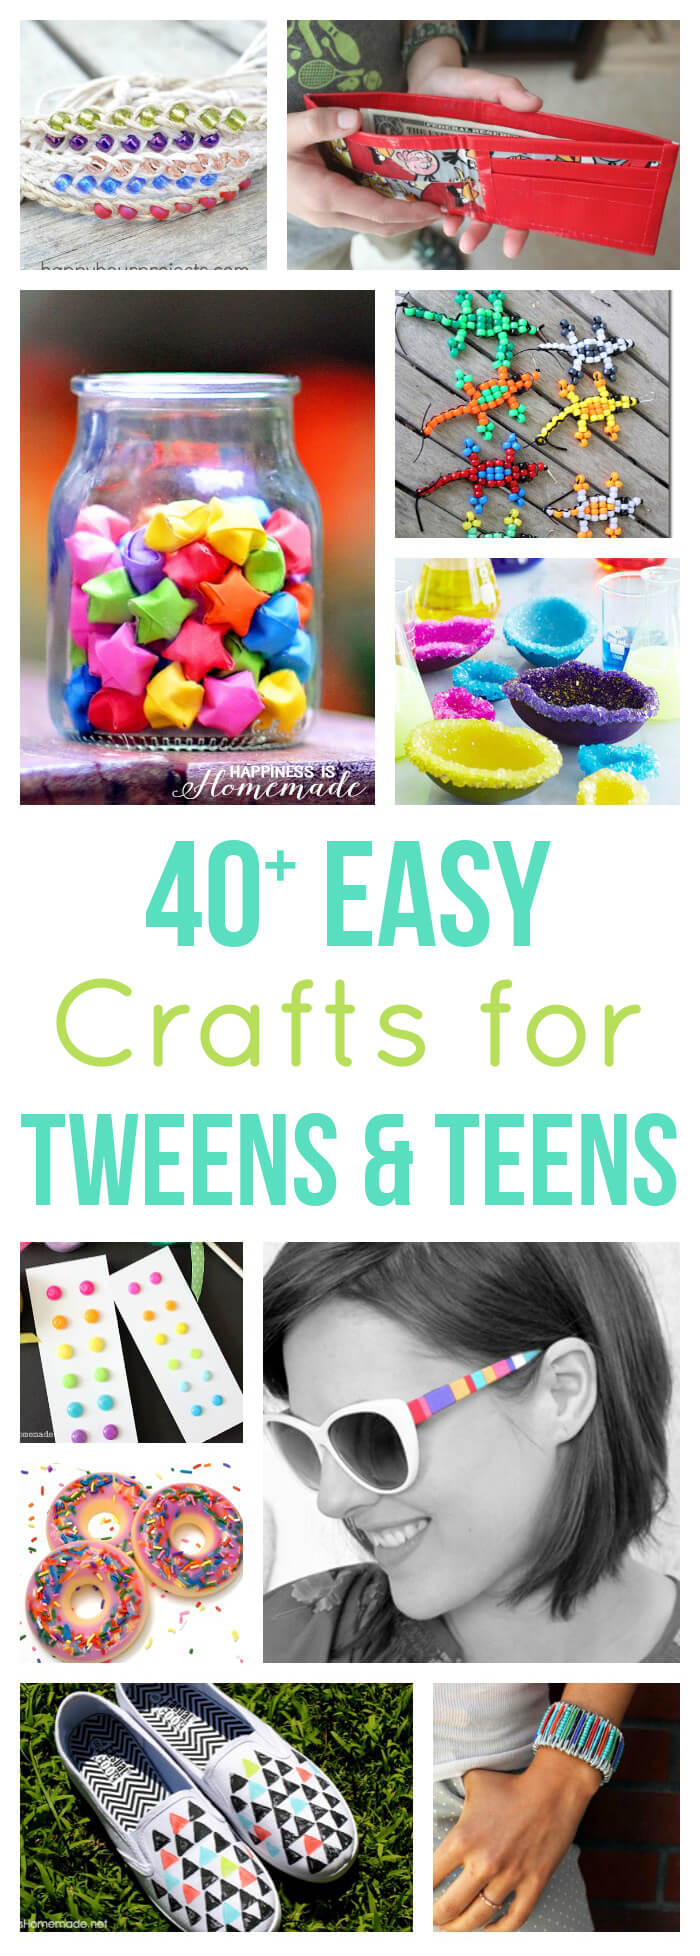 https://www.happinessishomemade.net/wp-content/uploads/2016/05/40-Easy-Crafts-for-Teens-and-Tweens.jpg